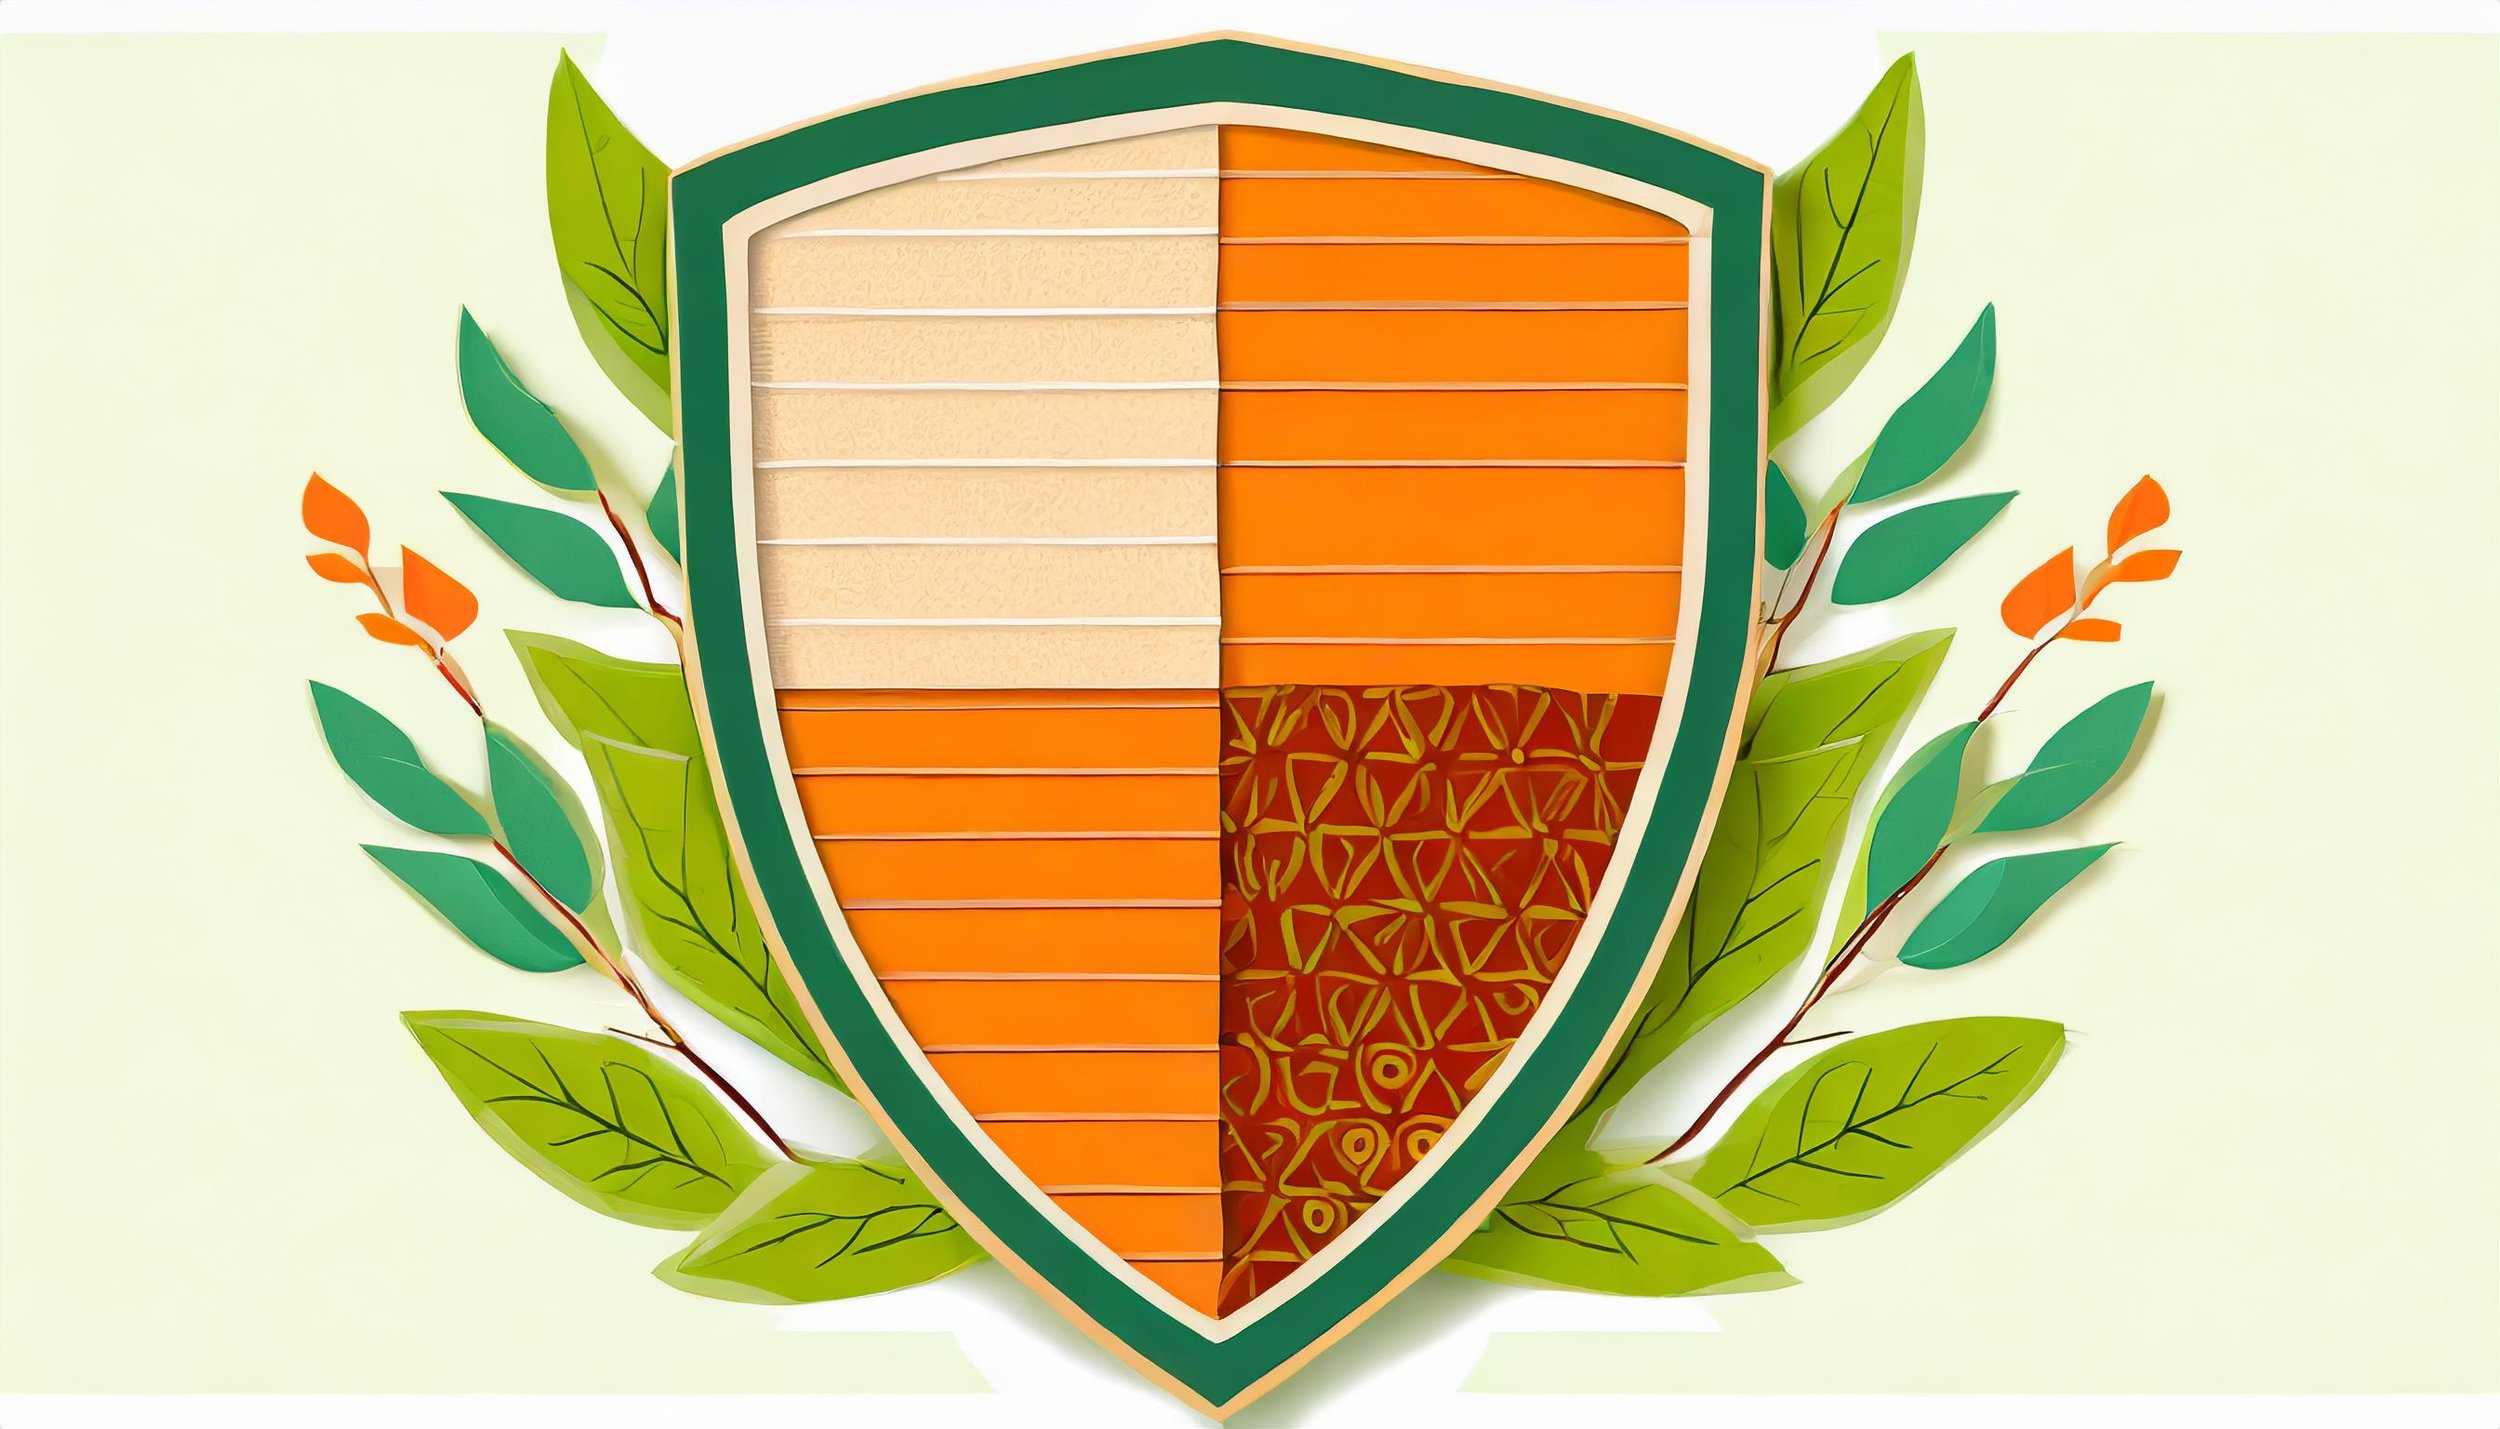 Firefly flat illustration of a medieval shield divided into six sections; oranges and greens; leaves (1).jpg